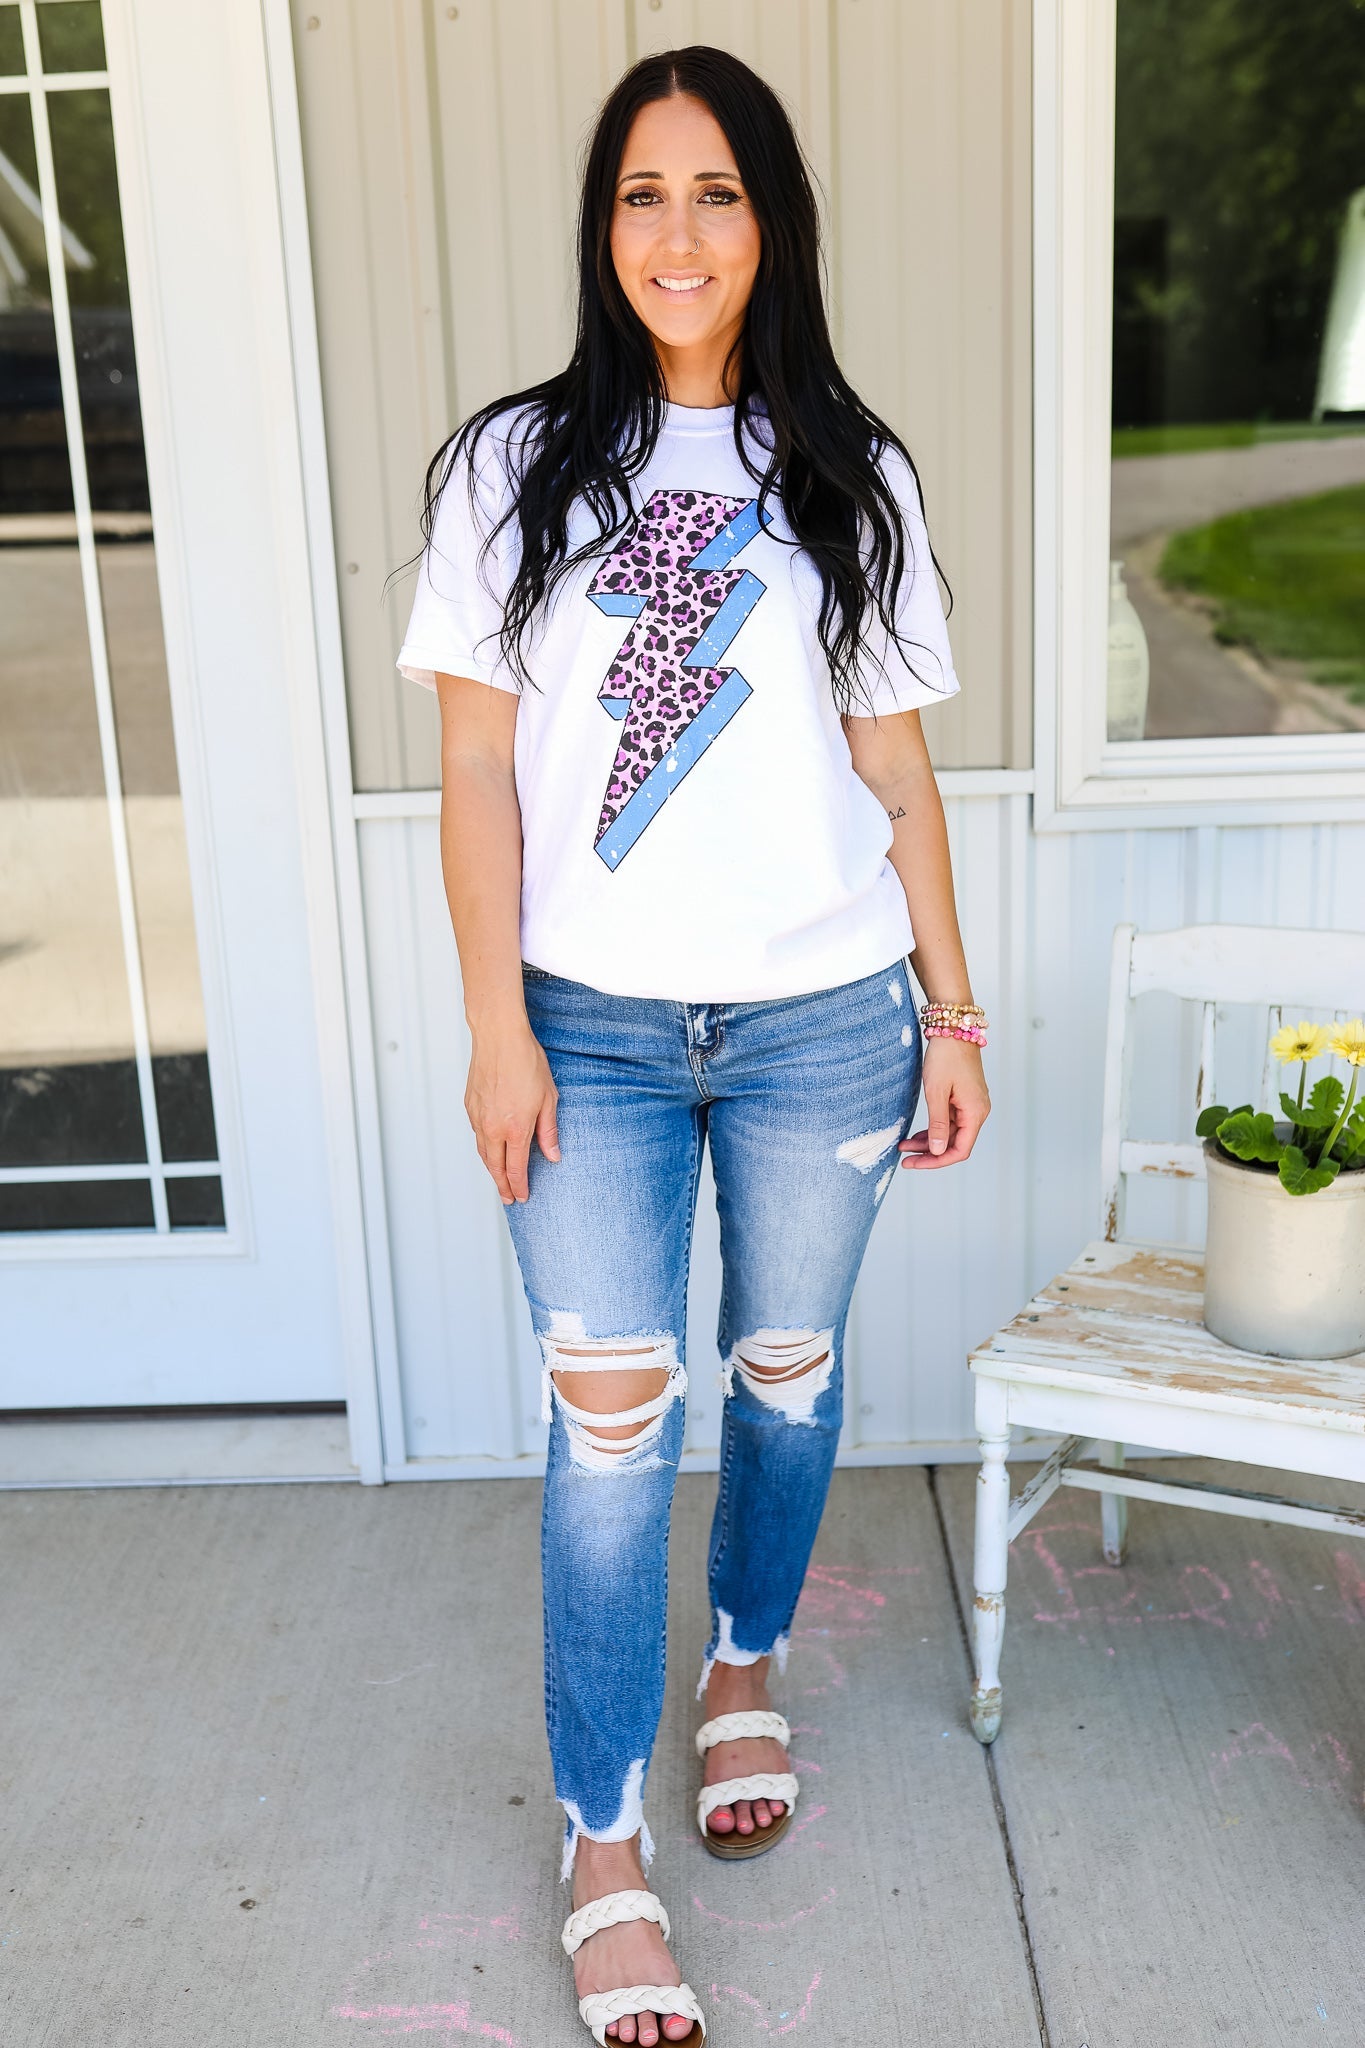 Distressed Colorful Leopard Lightning Bolt Graphic Tee - White